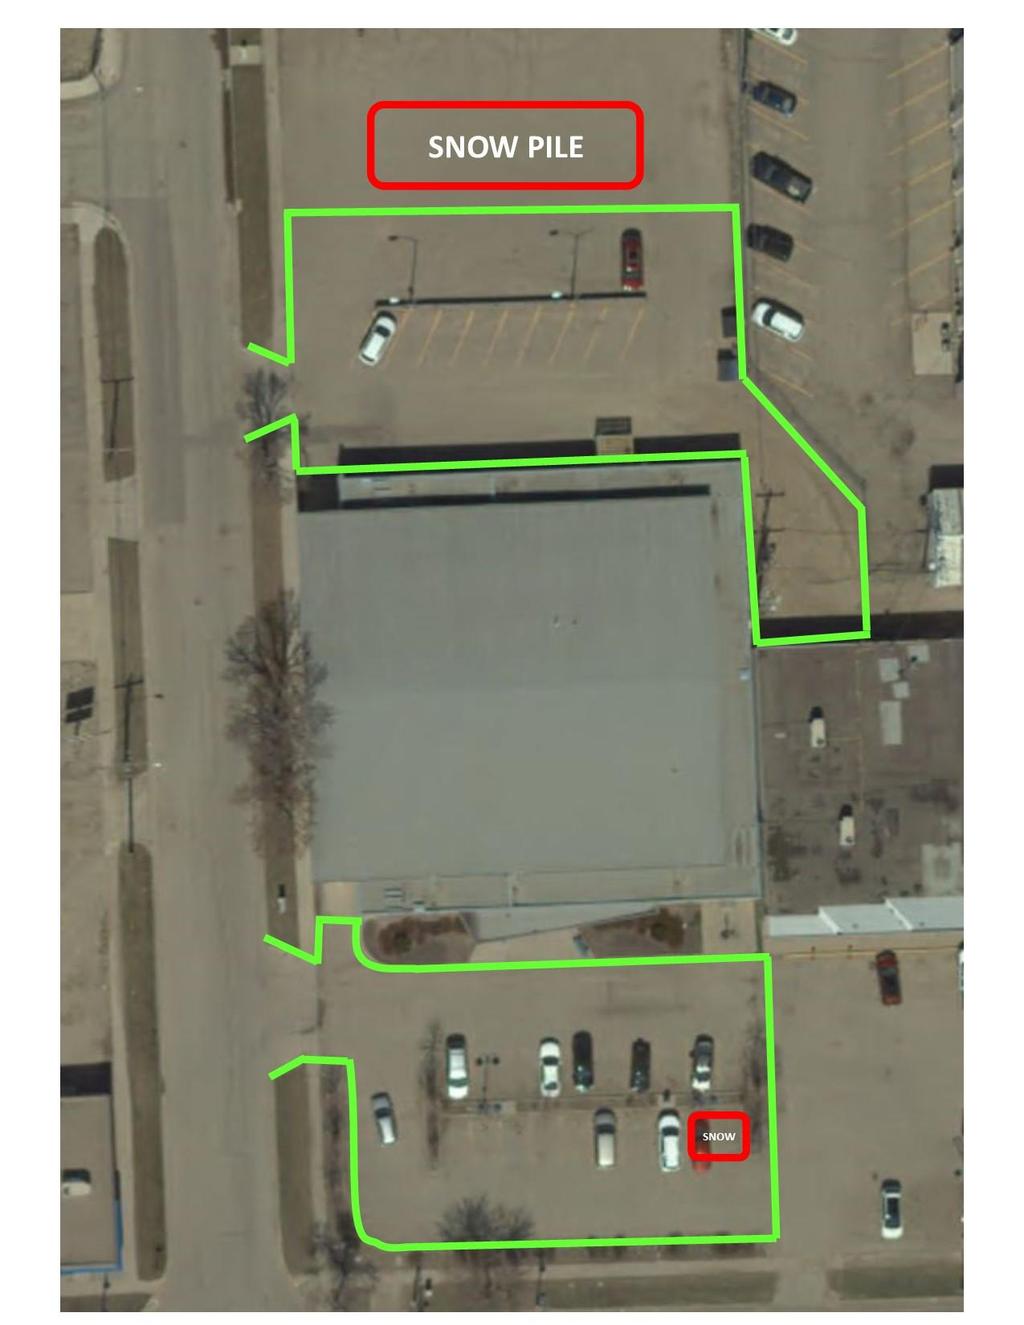 Yorkton Public Library 93 Broadway St. West Specifications: 1. Clearing is to be completed by 8:00a.m. 2. Snow in the north parking lot can be piled in the empty lot until requested to be hauled away.